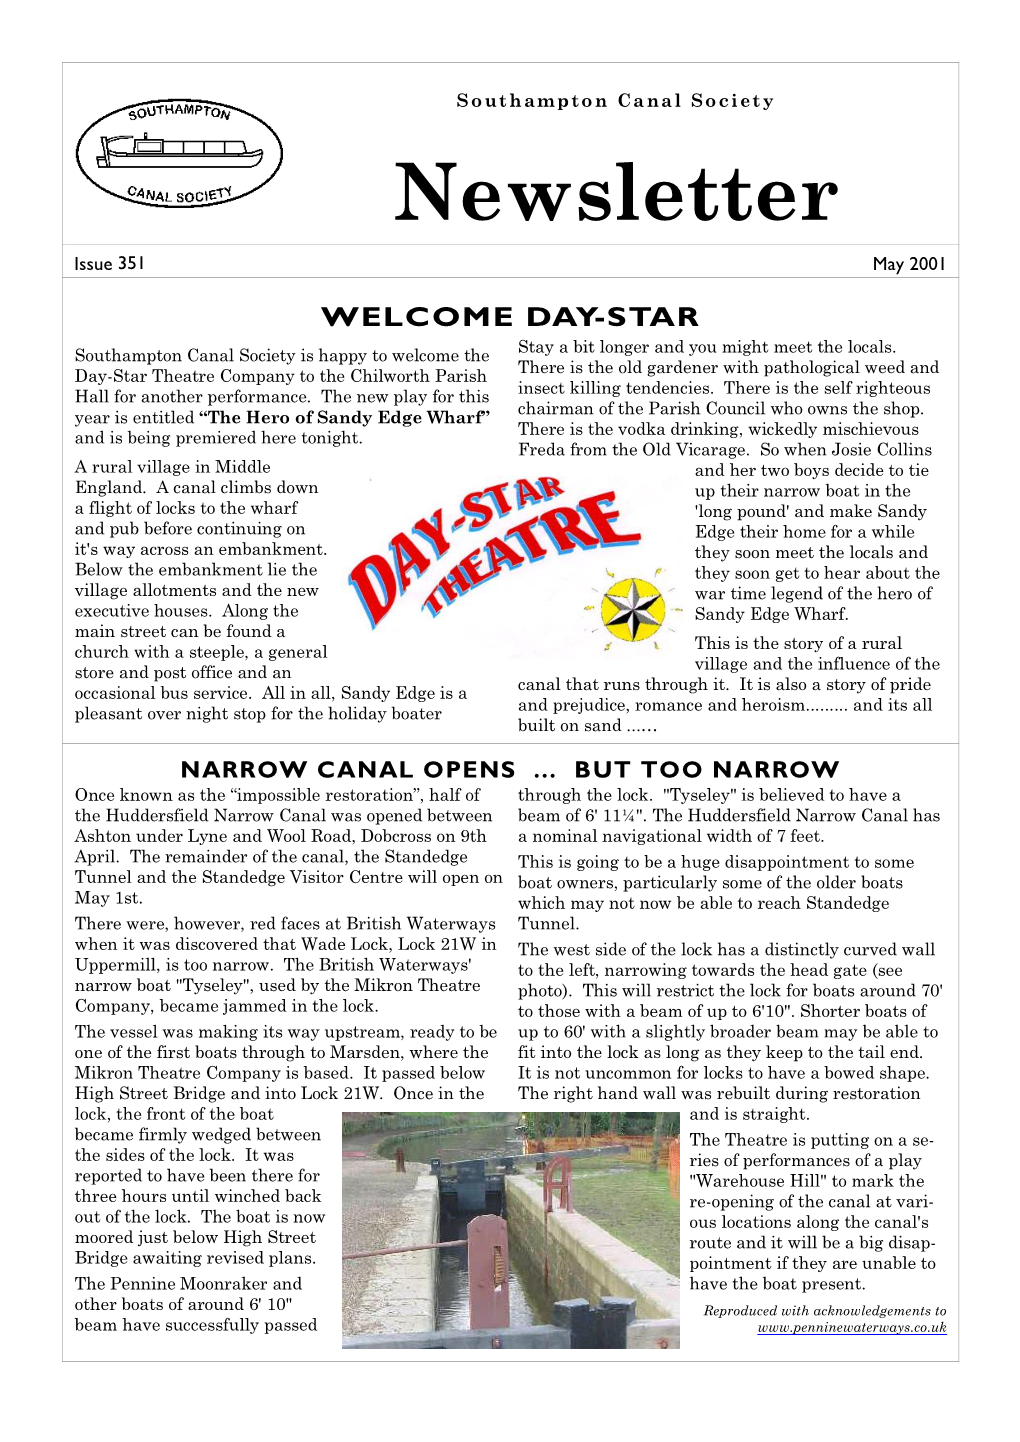 Southampton Canal Society Newsletter Issue 351 May 2001